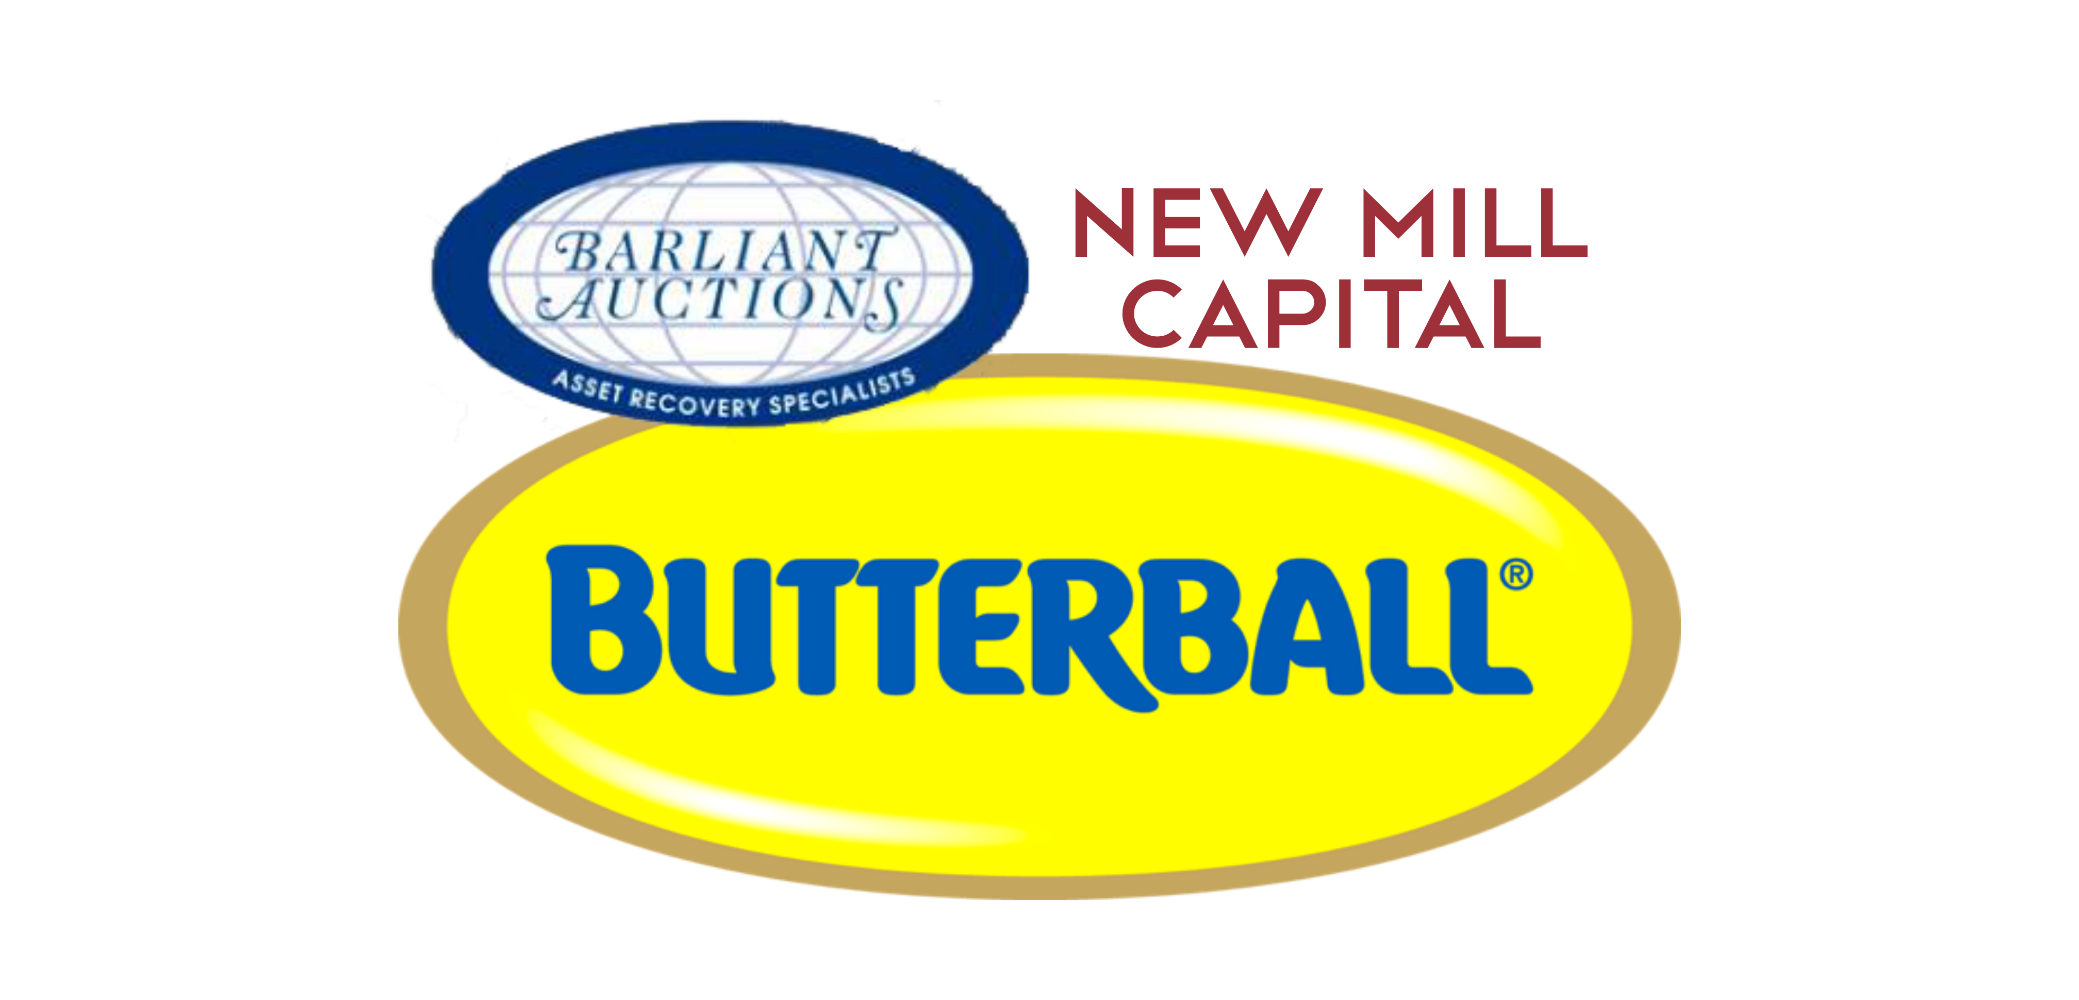 Assets no Longer Required by Butterball: 2019 Meyn Kill and Evisceration, Pickers, Chillers, Grinders, Stuffers, Pumps, Support & More